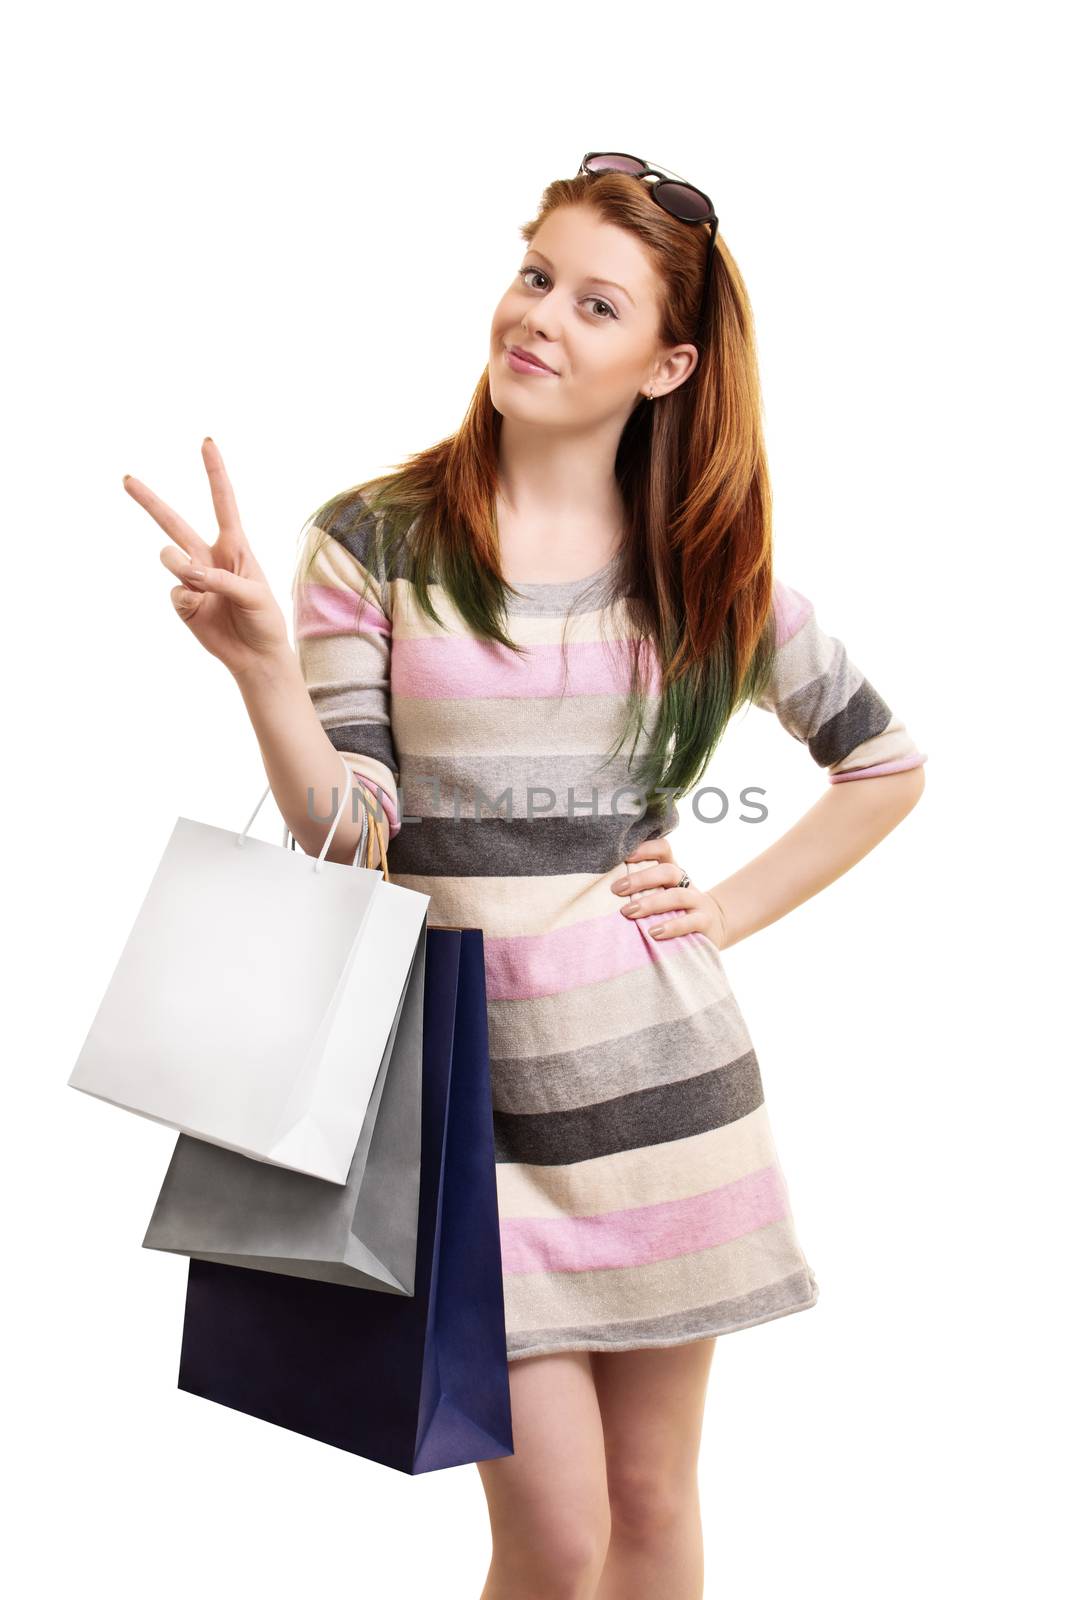 Beautiful young girl holding shopping bags and making a peace sign, isolated on a white background.